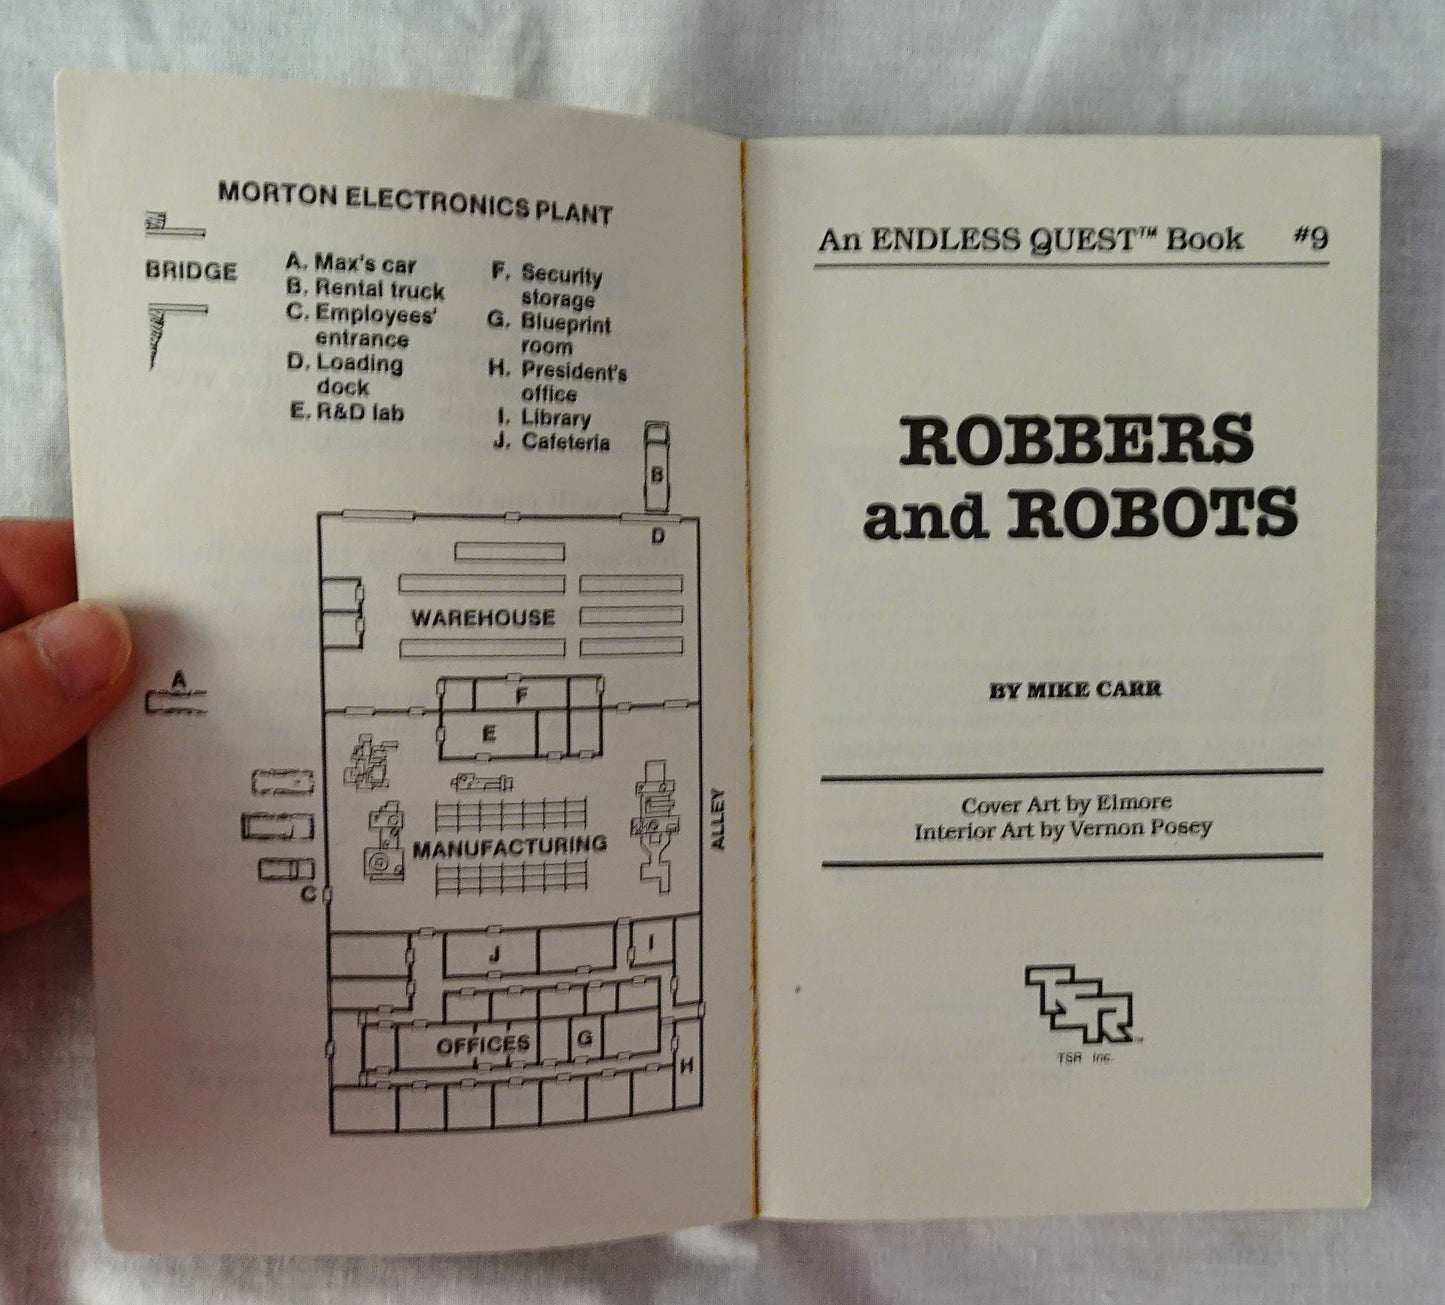 Robbers and Robots by Mike Carr